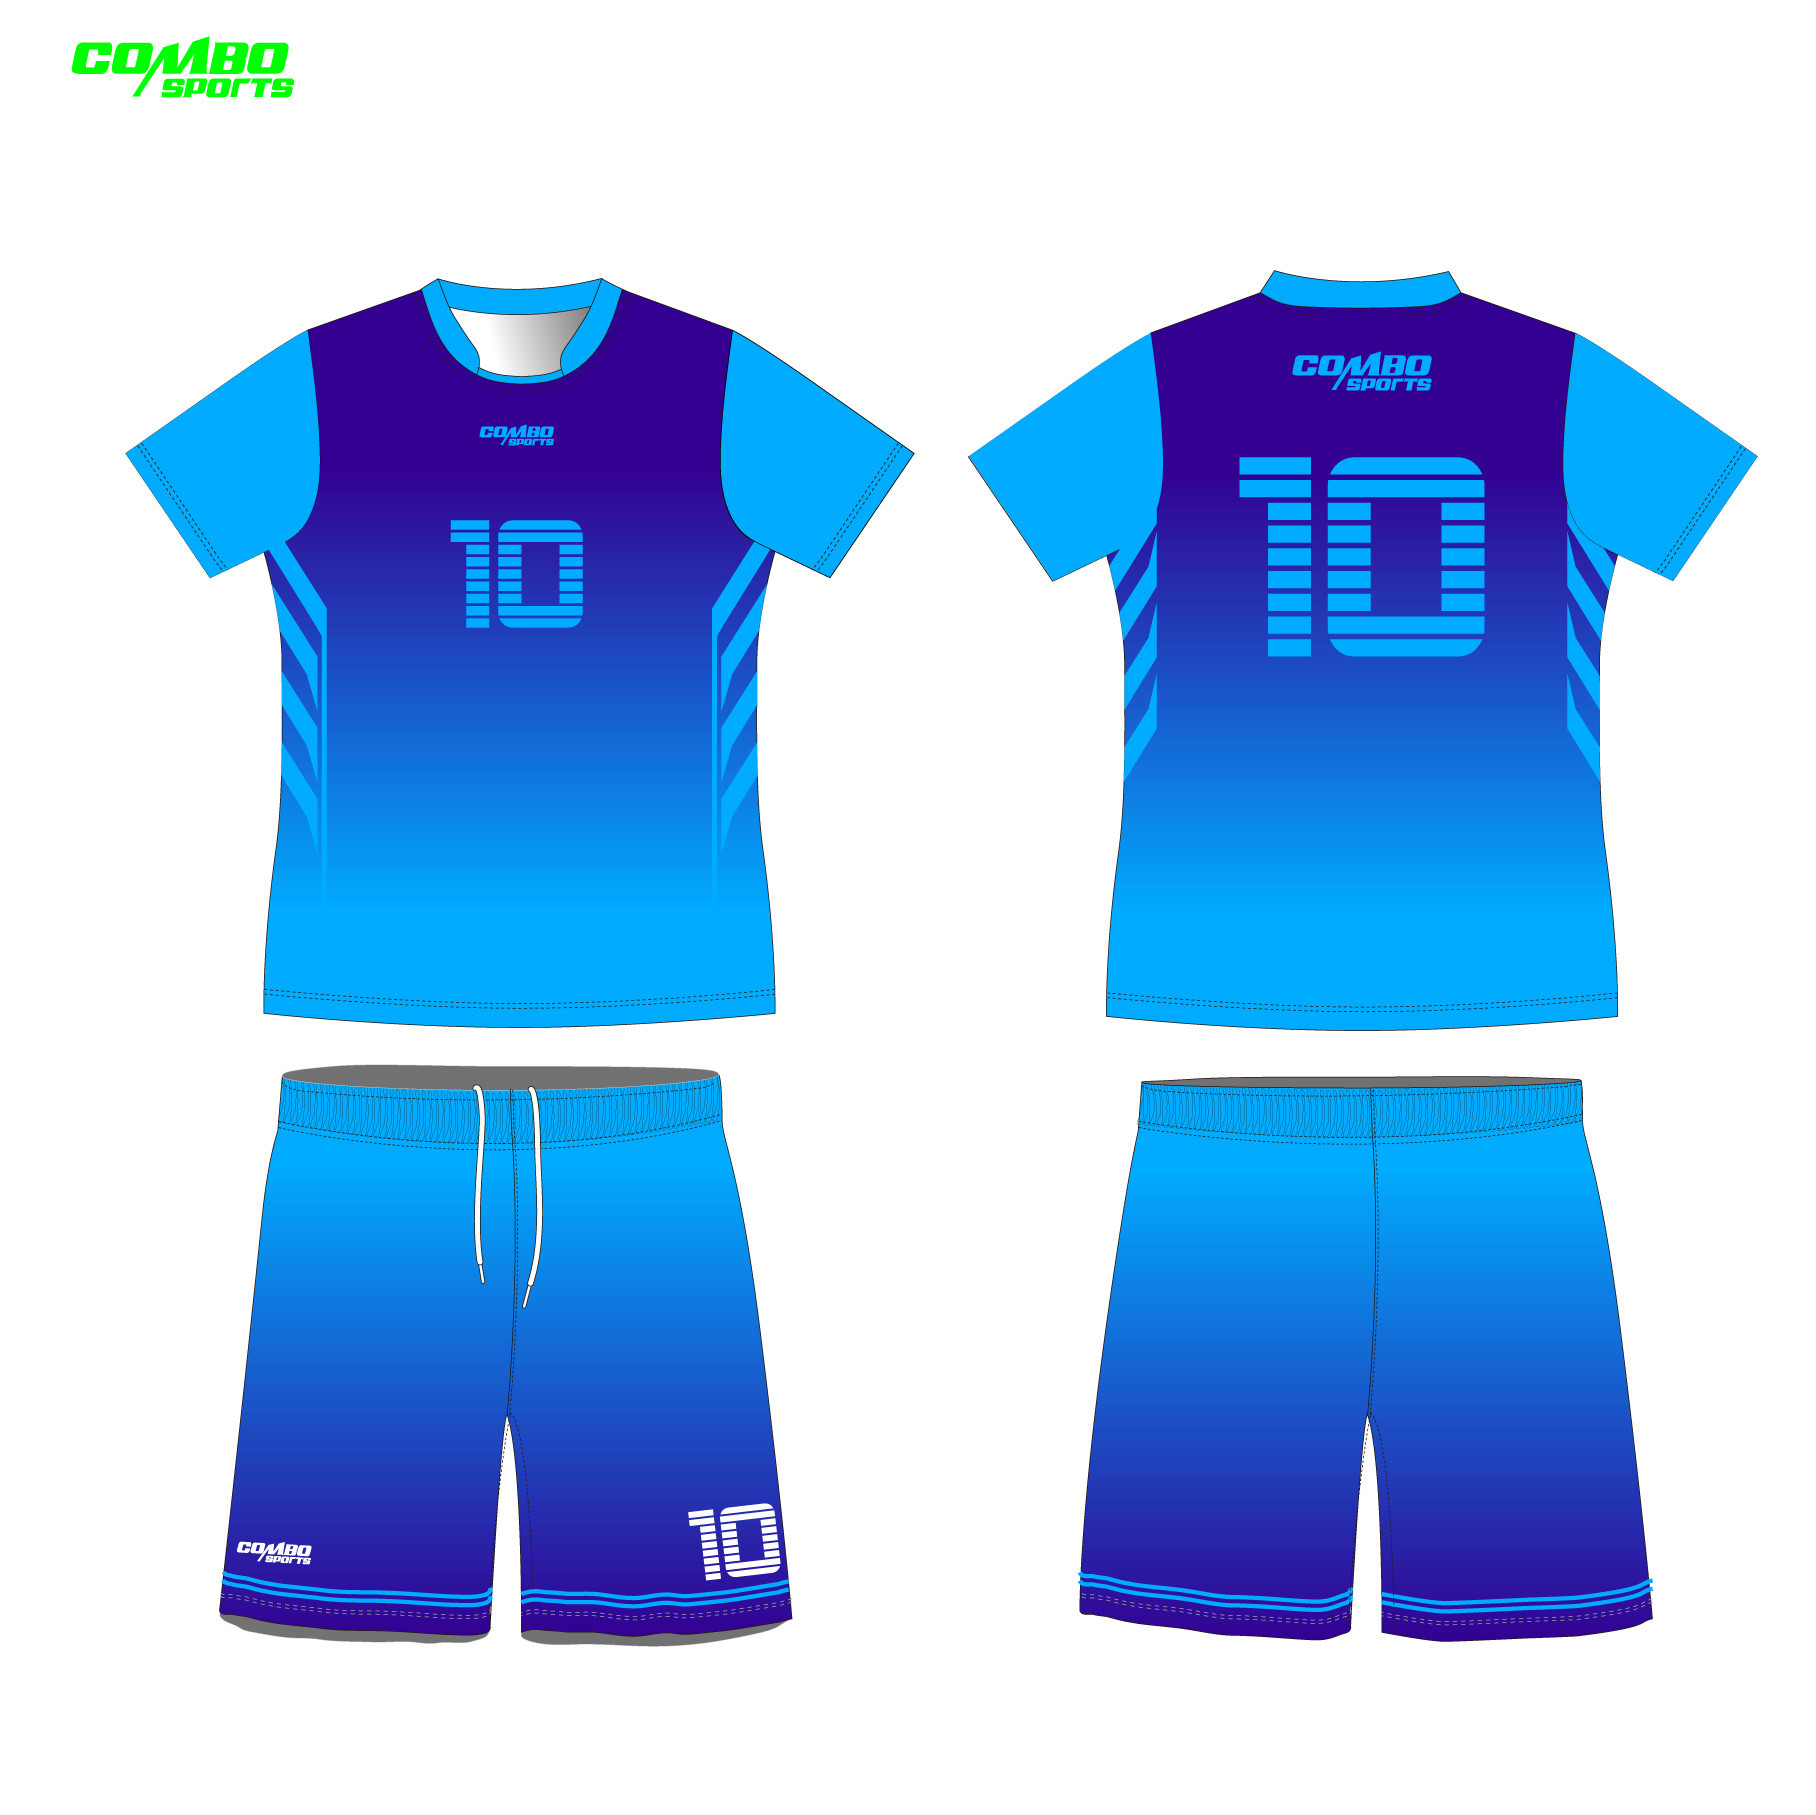  No MOQ Football Sublimation Soccer Uniform for Clubs Custom Made Manufactures